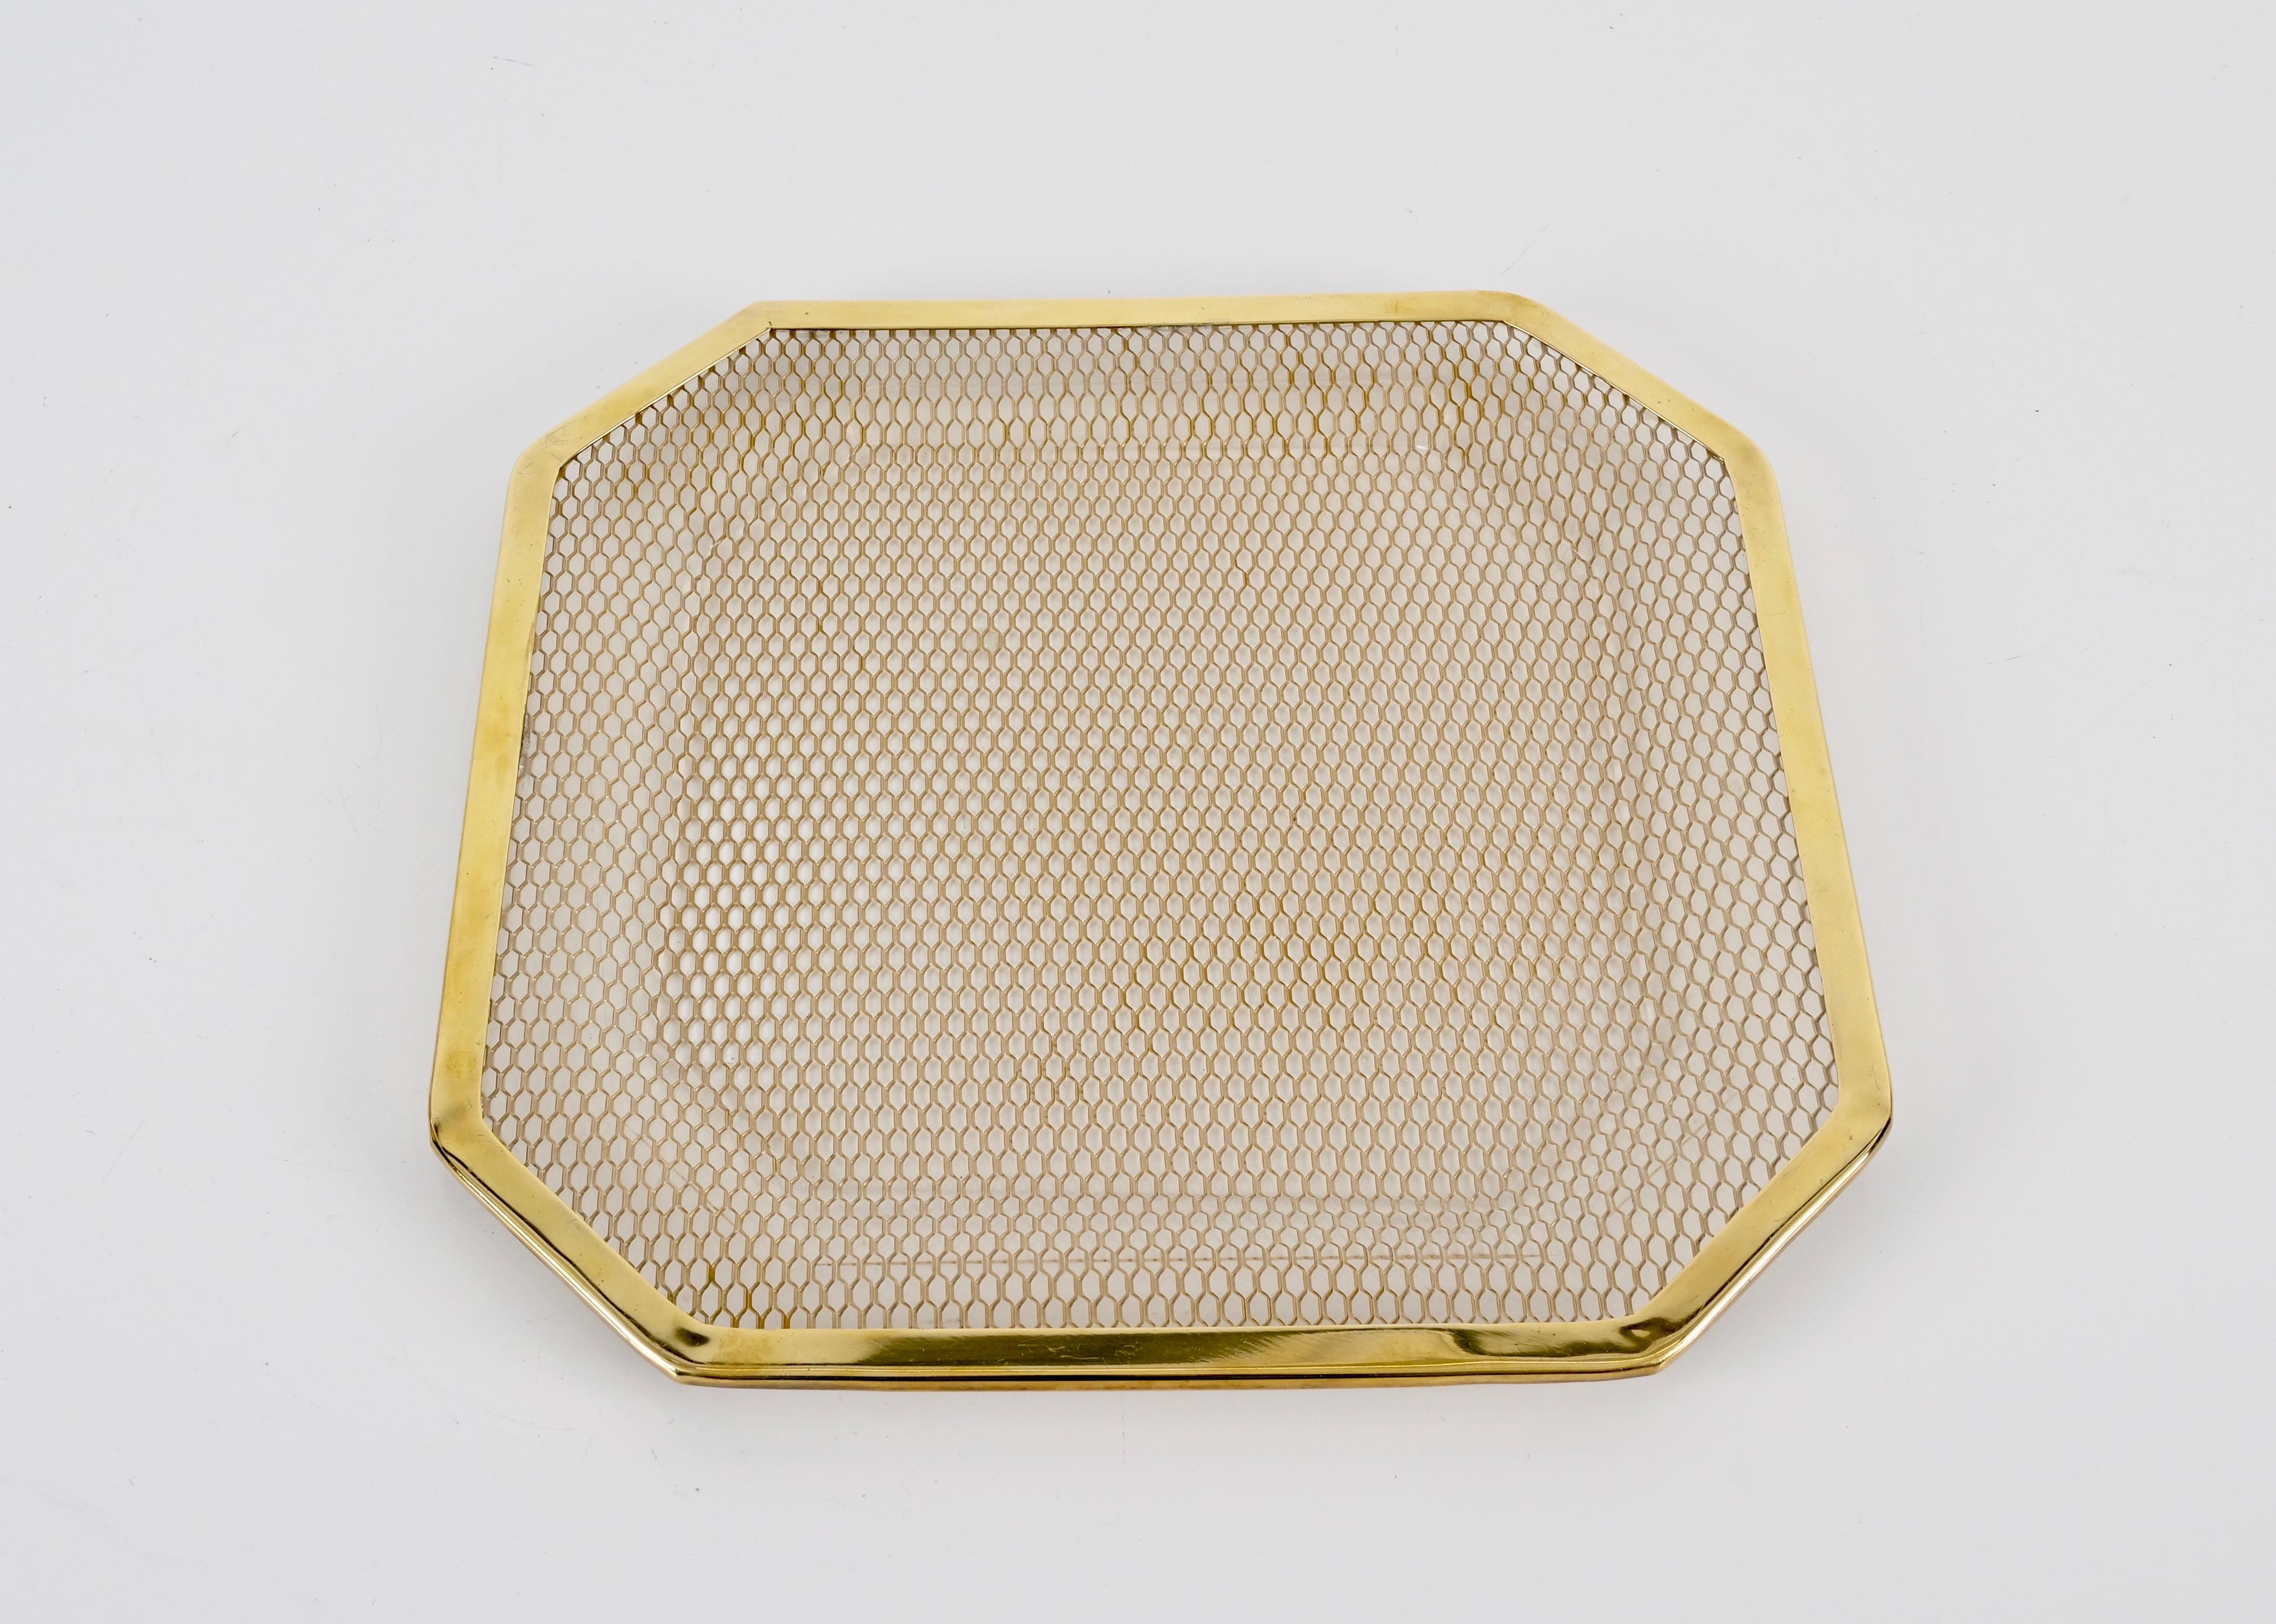 Midcentury Lucite and Brass Octagonal Italian Tray, Willy Rizzo Style, 1970s In Good Condition For Sale In Roma, IT